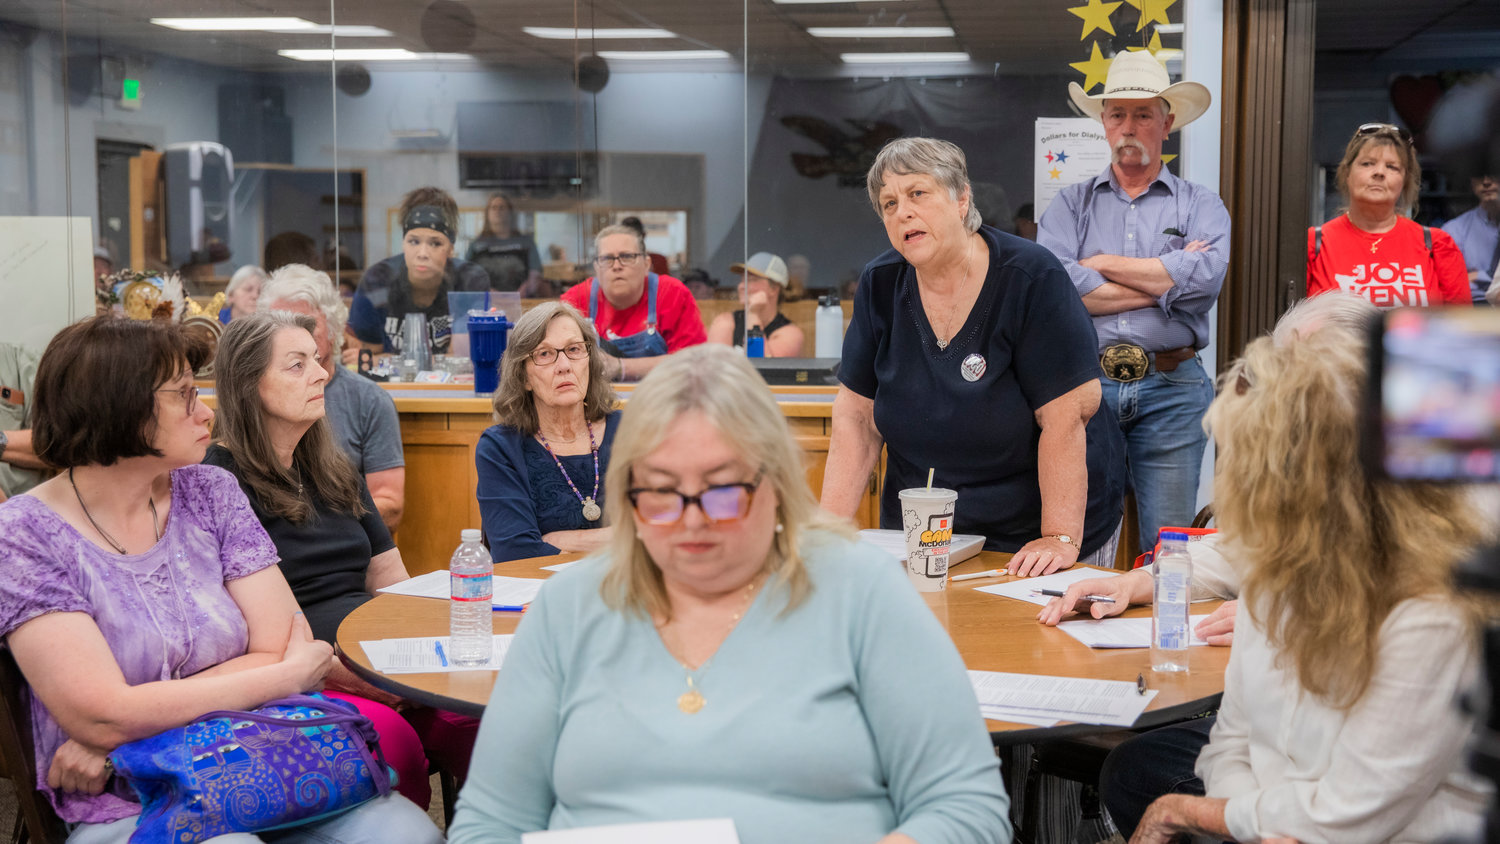 Carol Kearns, the Cowlitz Precinct Committee Officer, stands up to speak during a Lewis County Republicans meeting at the Chehalis Eagles Aerie  last month.